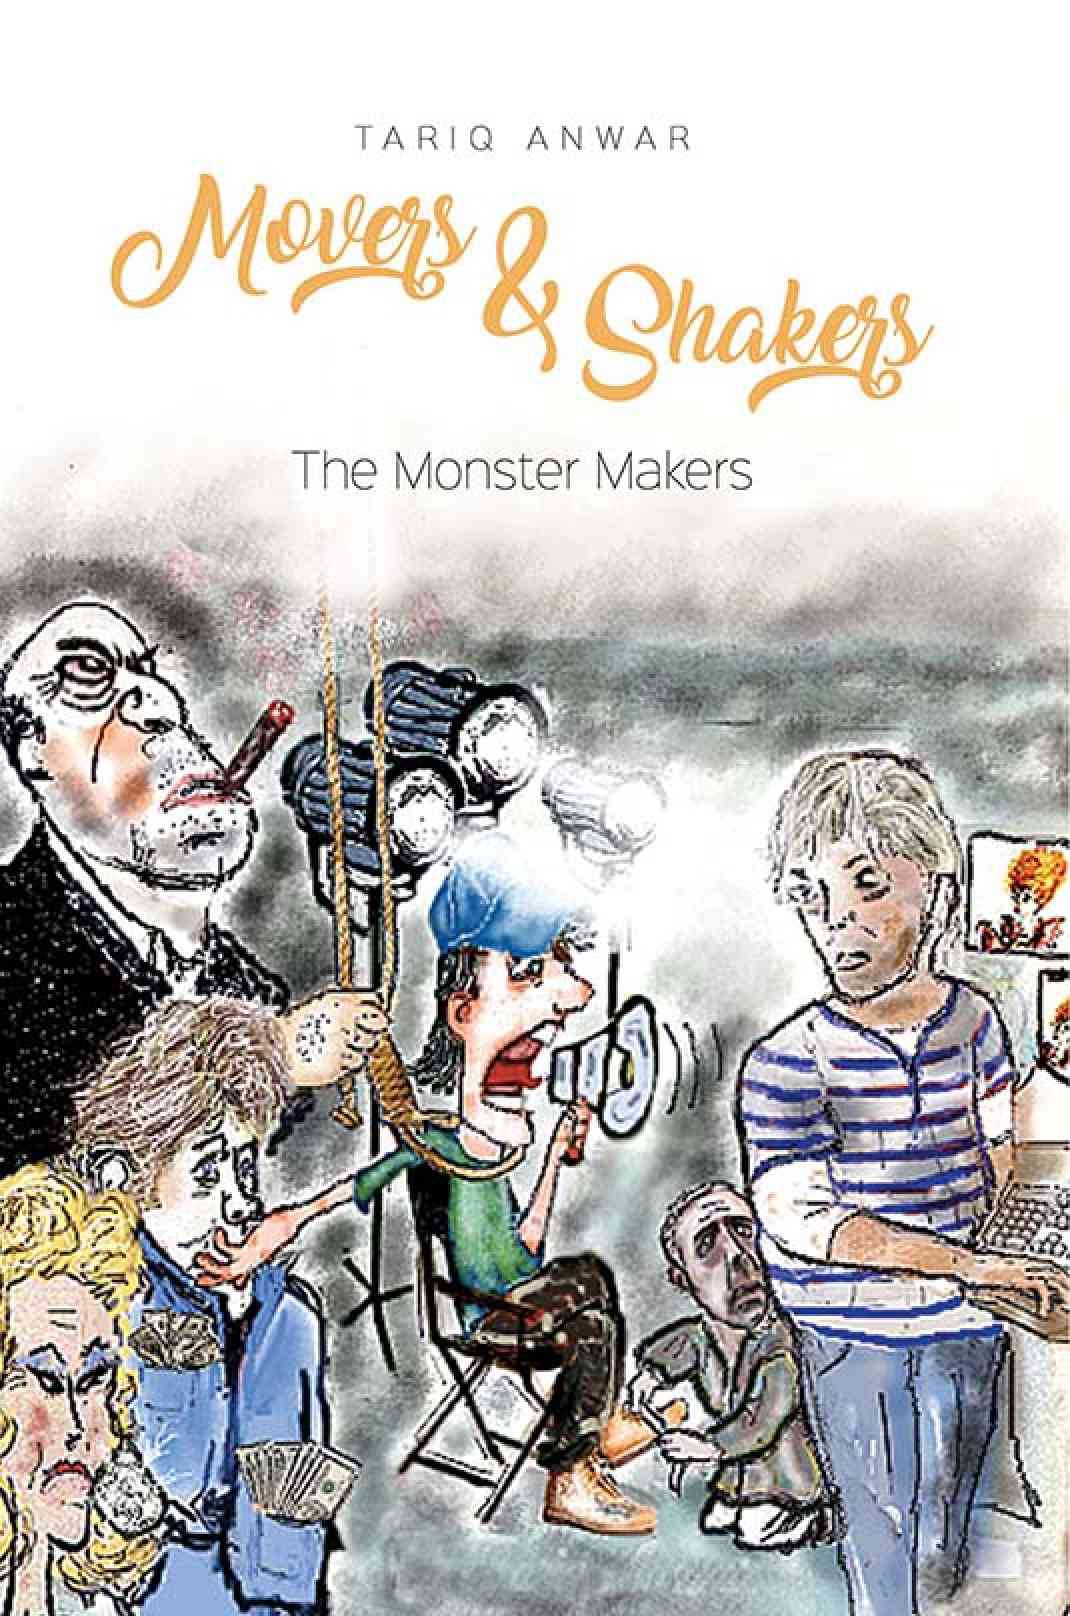 Movers and Shakers, The Monster Makers by Tariq Anwar Featured in the Sun Newspaper